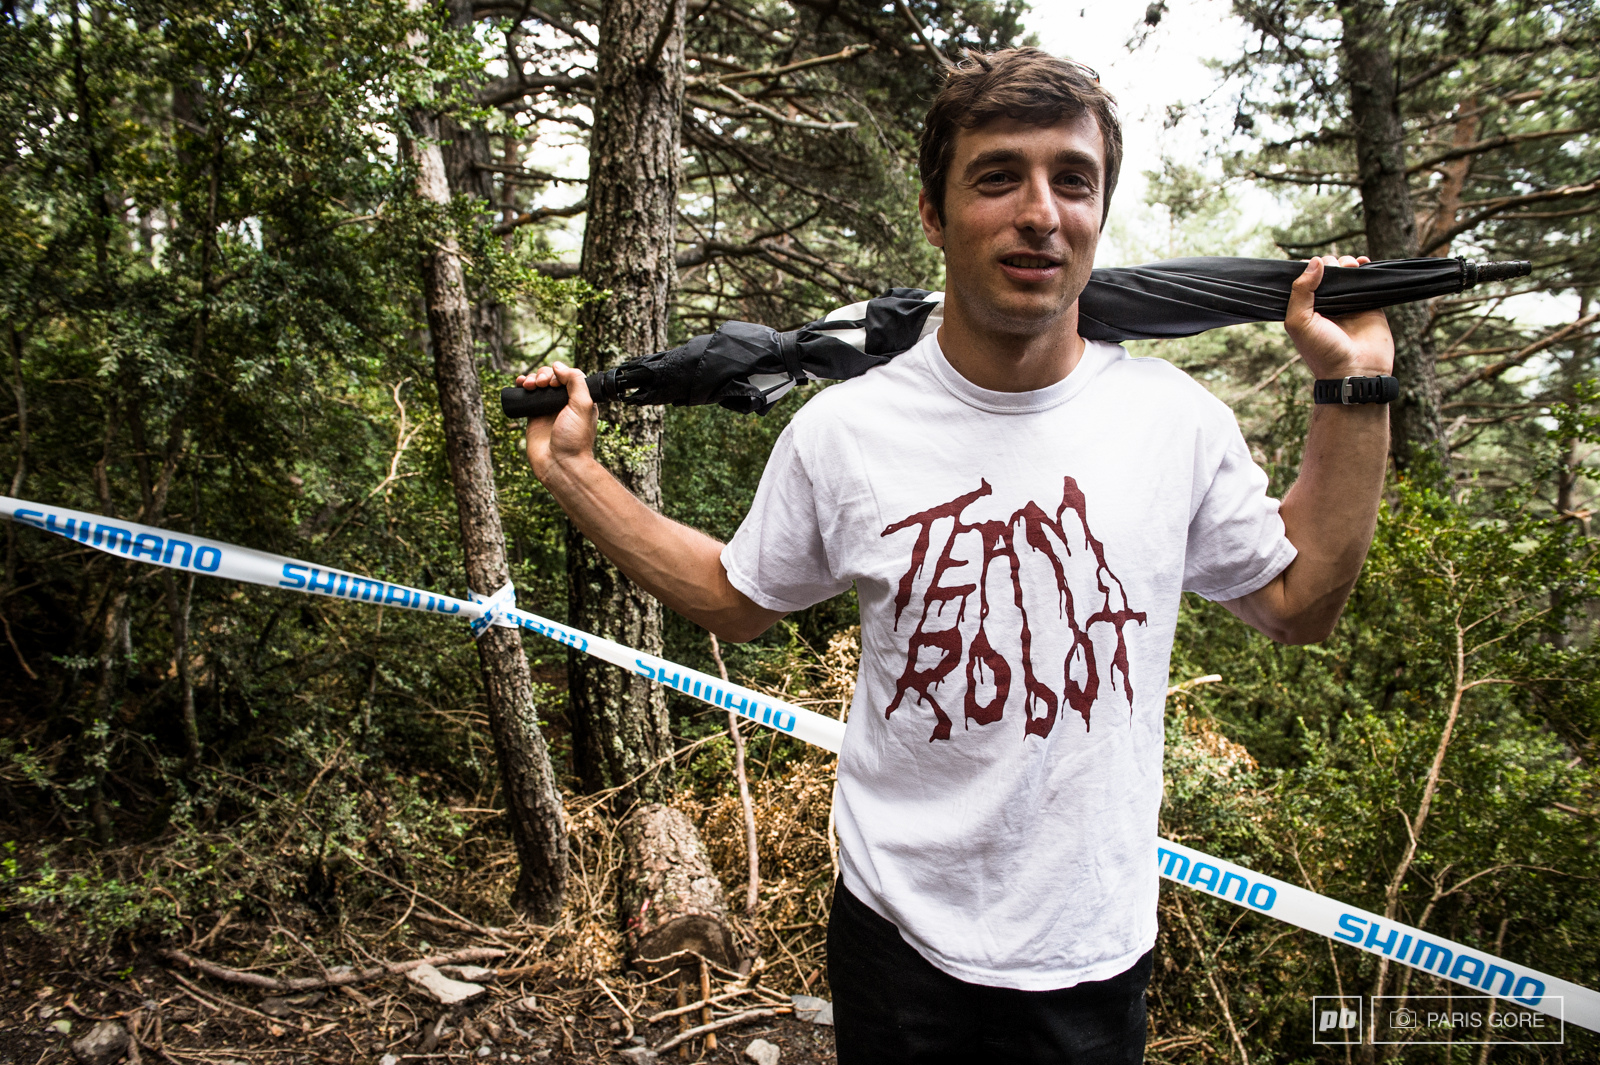 Luke Strobel just rolled over from the NW, the track is looking like what he's used to over in the wet, steep and rooty Northwest. Proudly rocking his Team Robot shirt, the only new source with the best B-Grade, 3 week late news in the MTB industry.